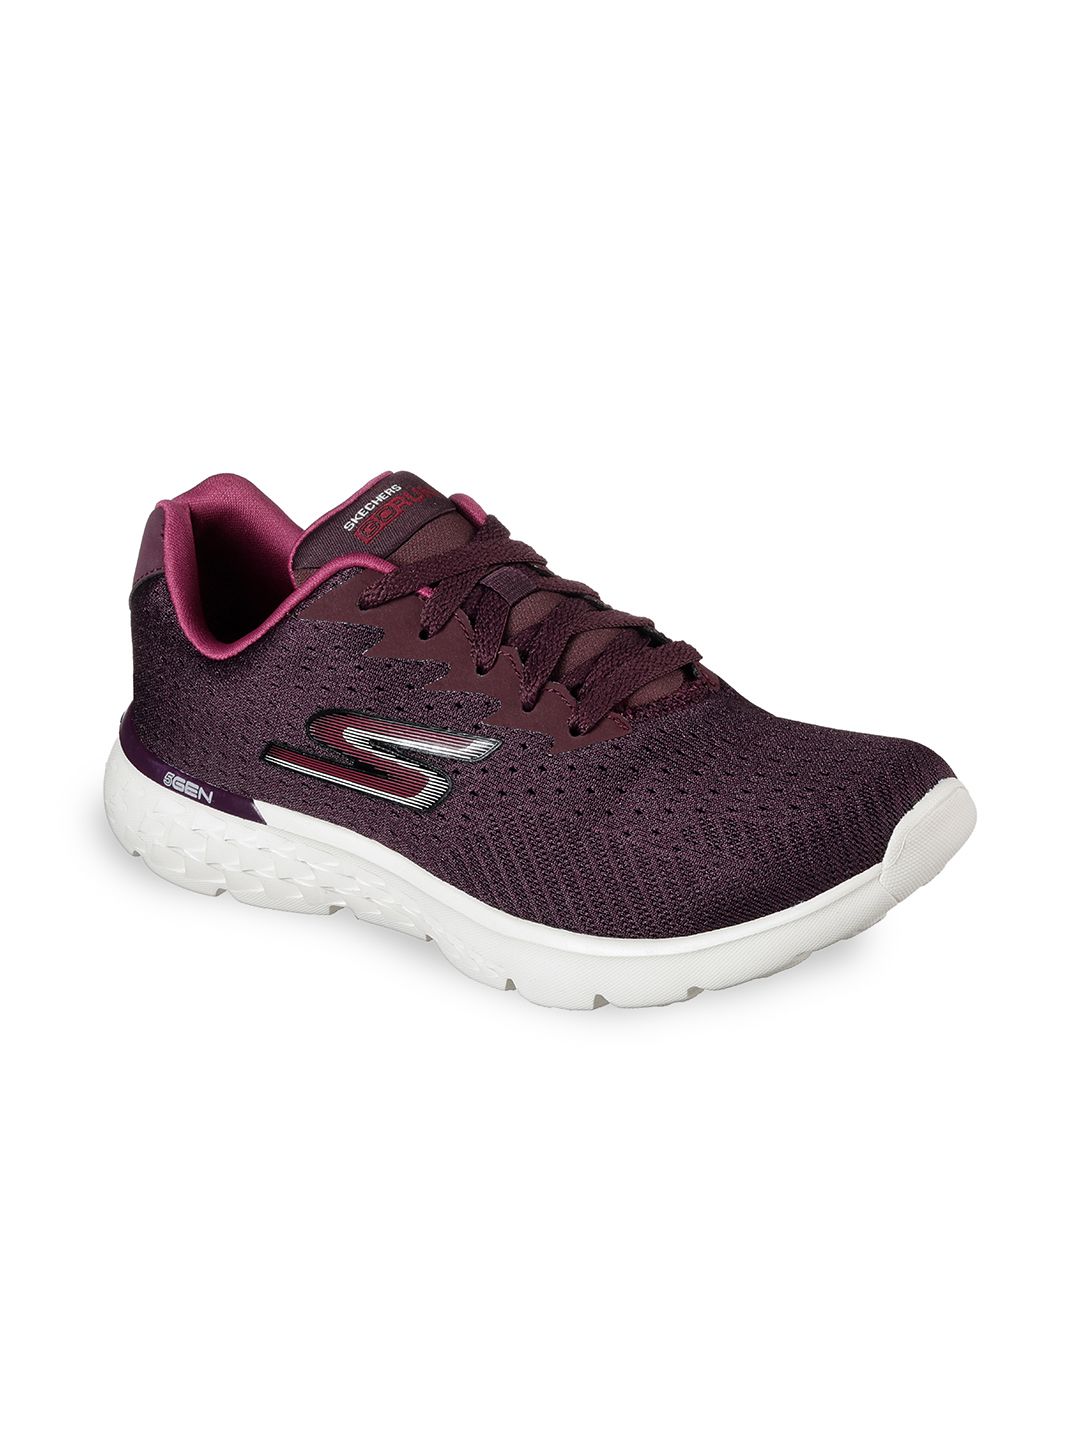 Skechers Women Red Mesh Running SOLE Non-Marking Shoes Price in India